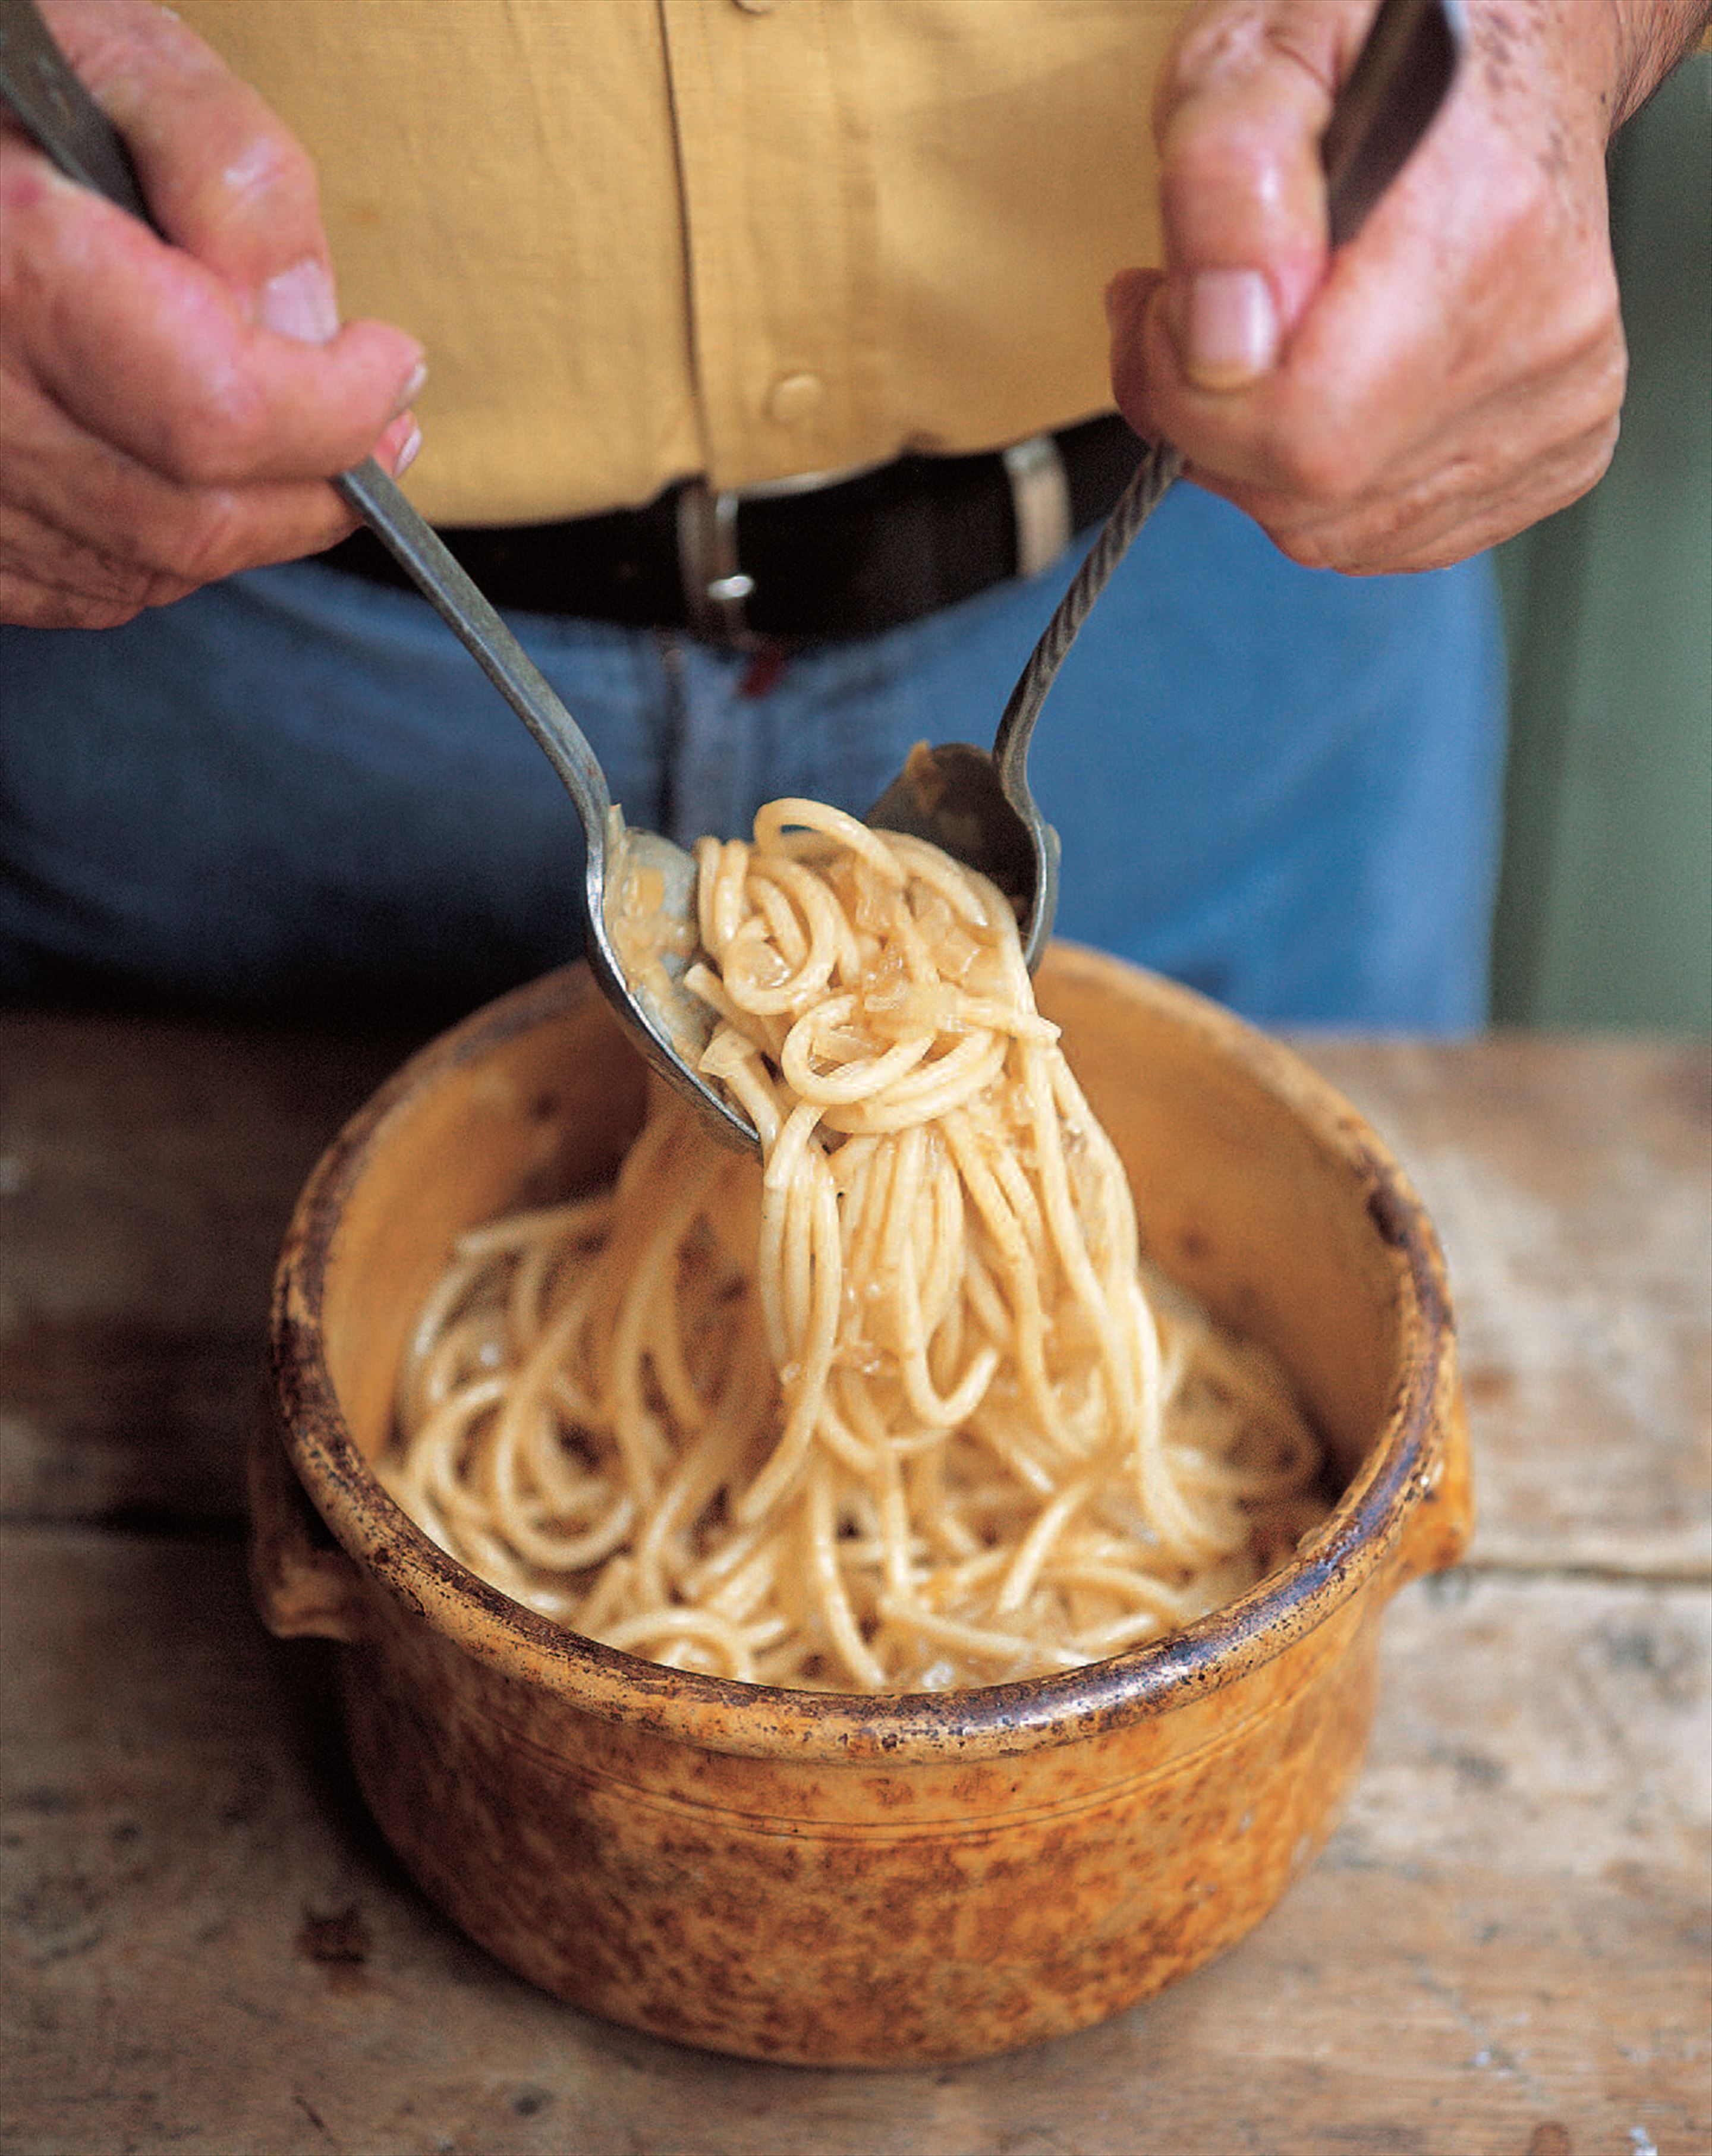 Giant spaghetti with onion and anchovy sauce